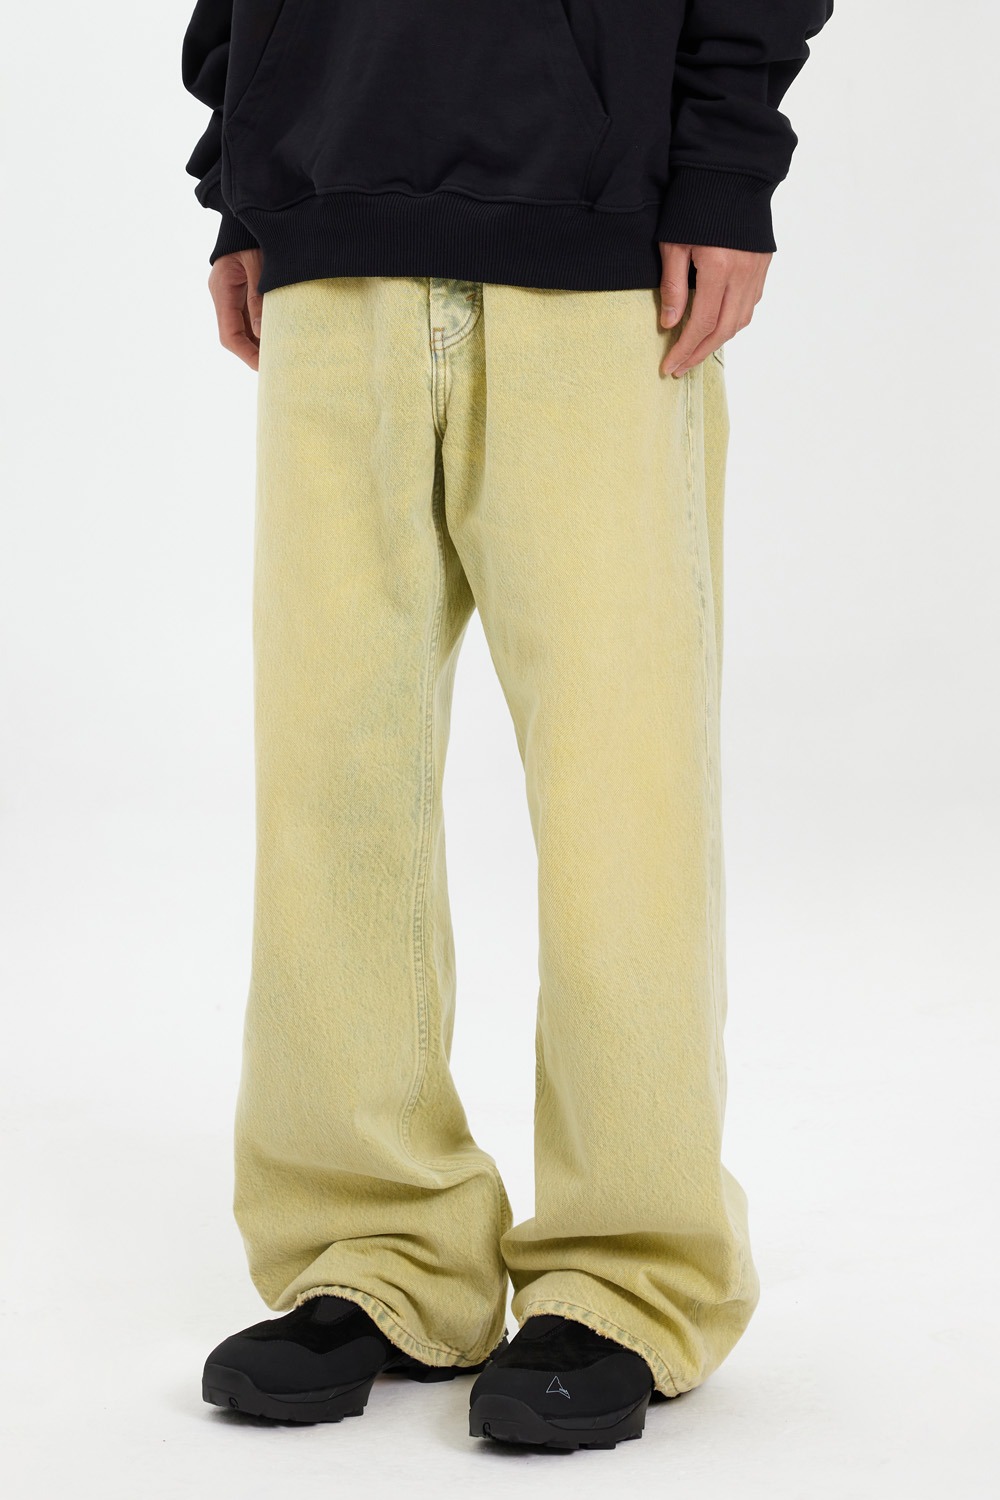 Criss Jeans_Yellow